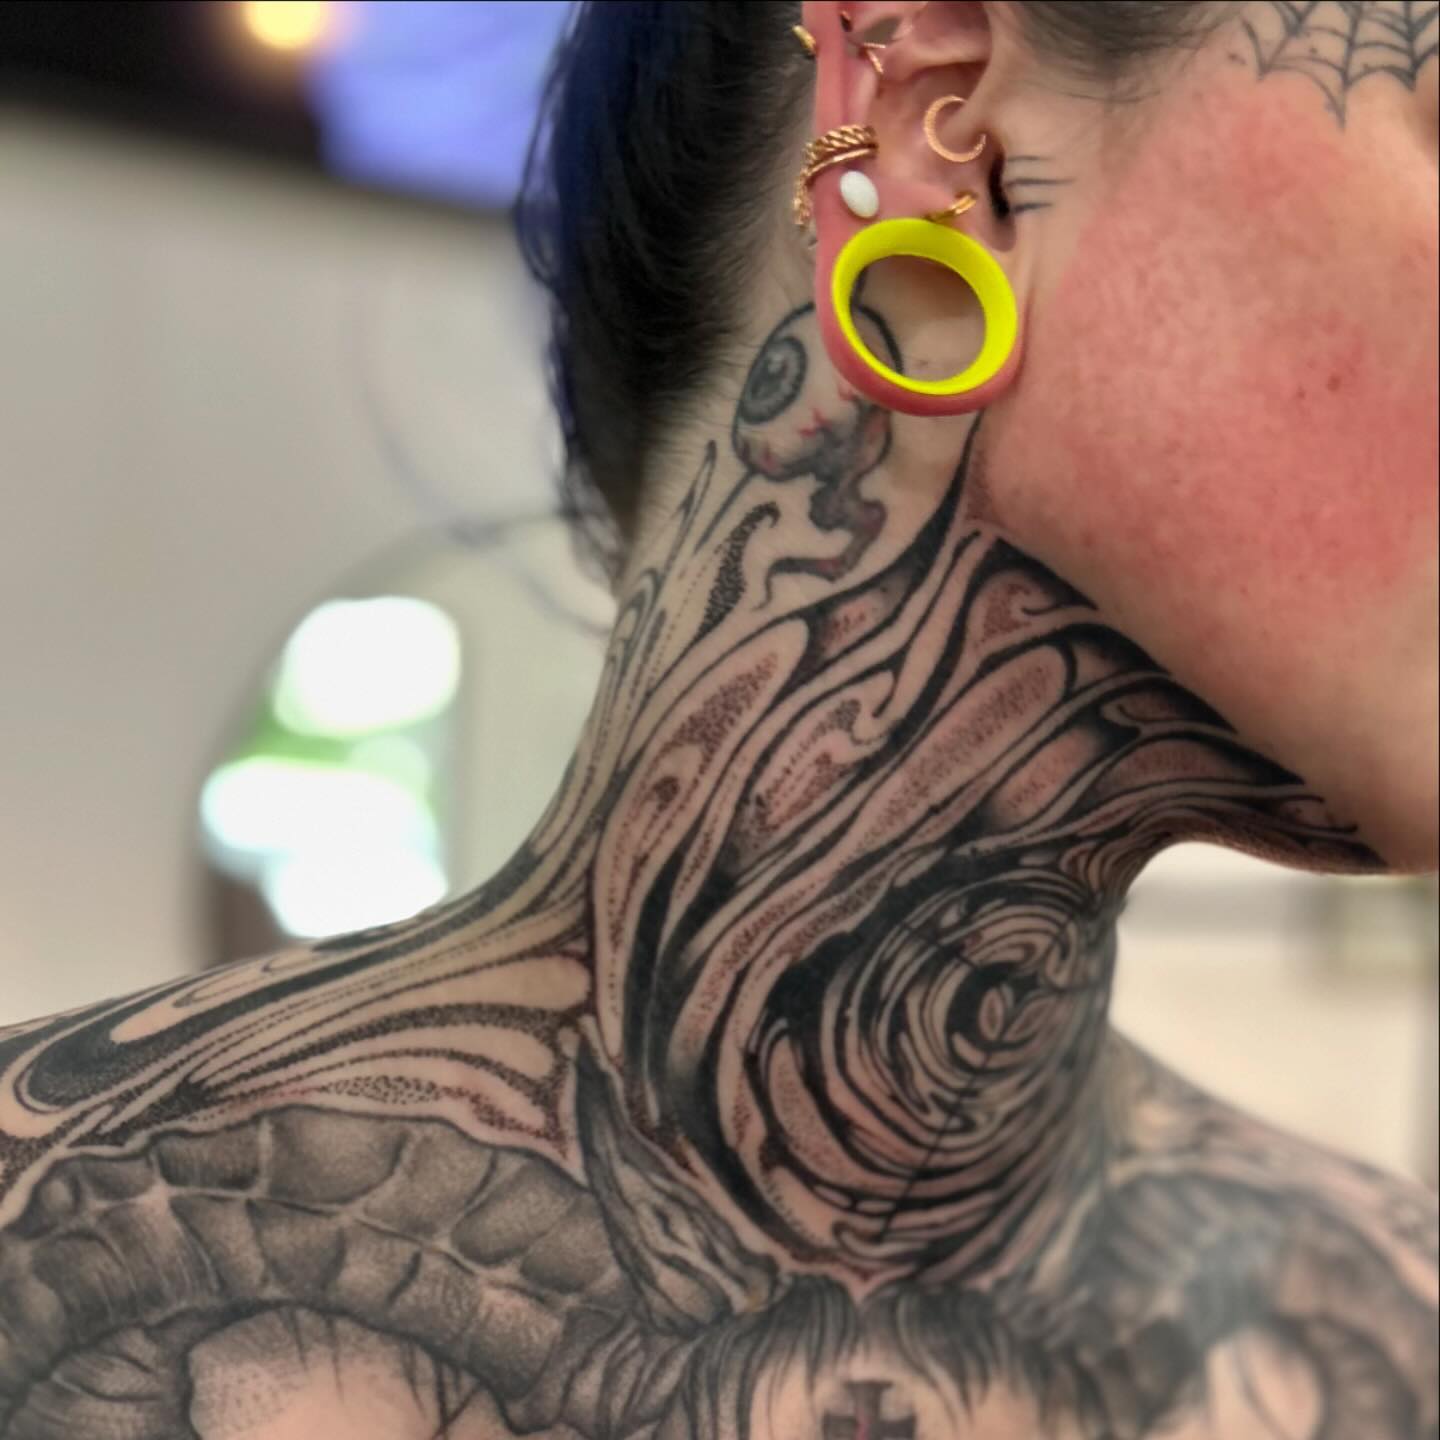 Finished “As above so below” throat spiral with hidden spider and 666 🌀🕷️#spiderlegs#throattattoo#necktattoo#spidertattoo#inkedgirls#tattooedgirls#treehousecustomtattoo#tattooyourface